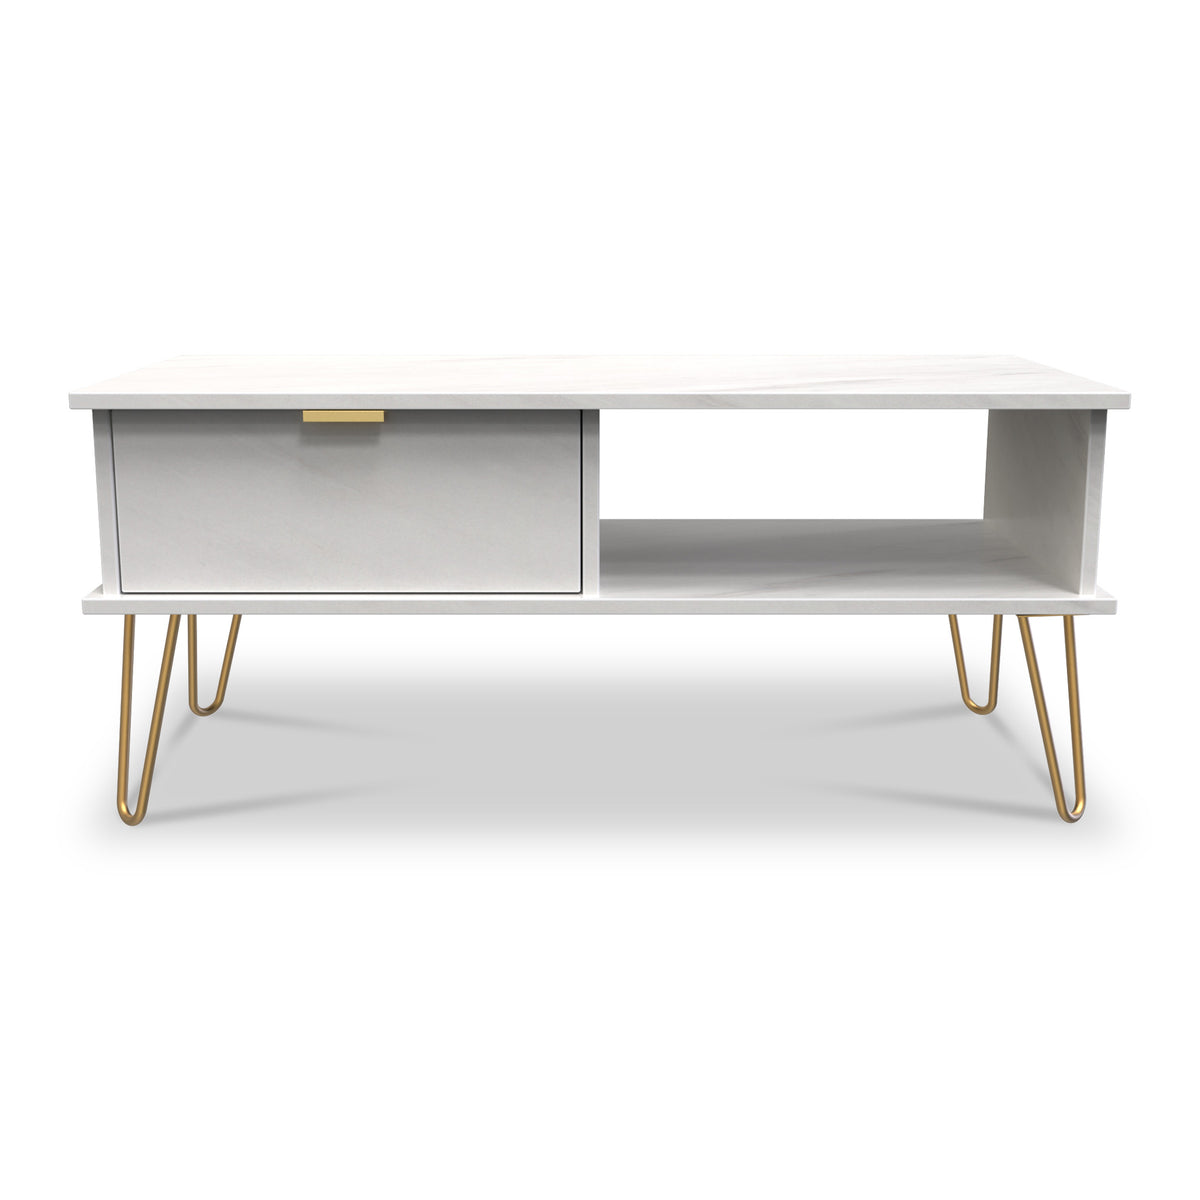 Moreno White Marble 1 Drawer Coffee Table for living room